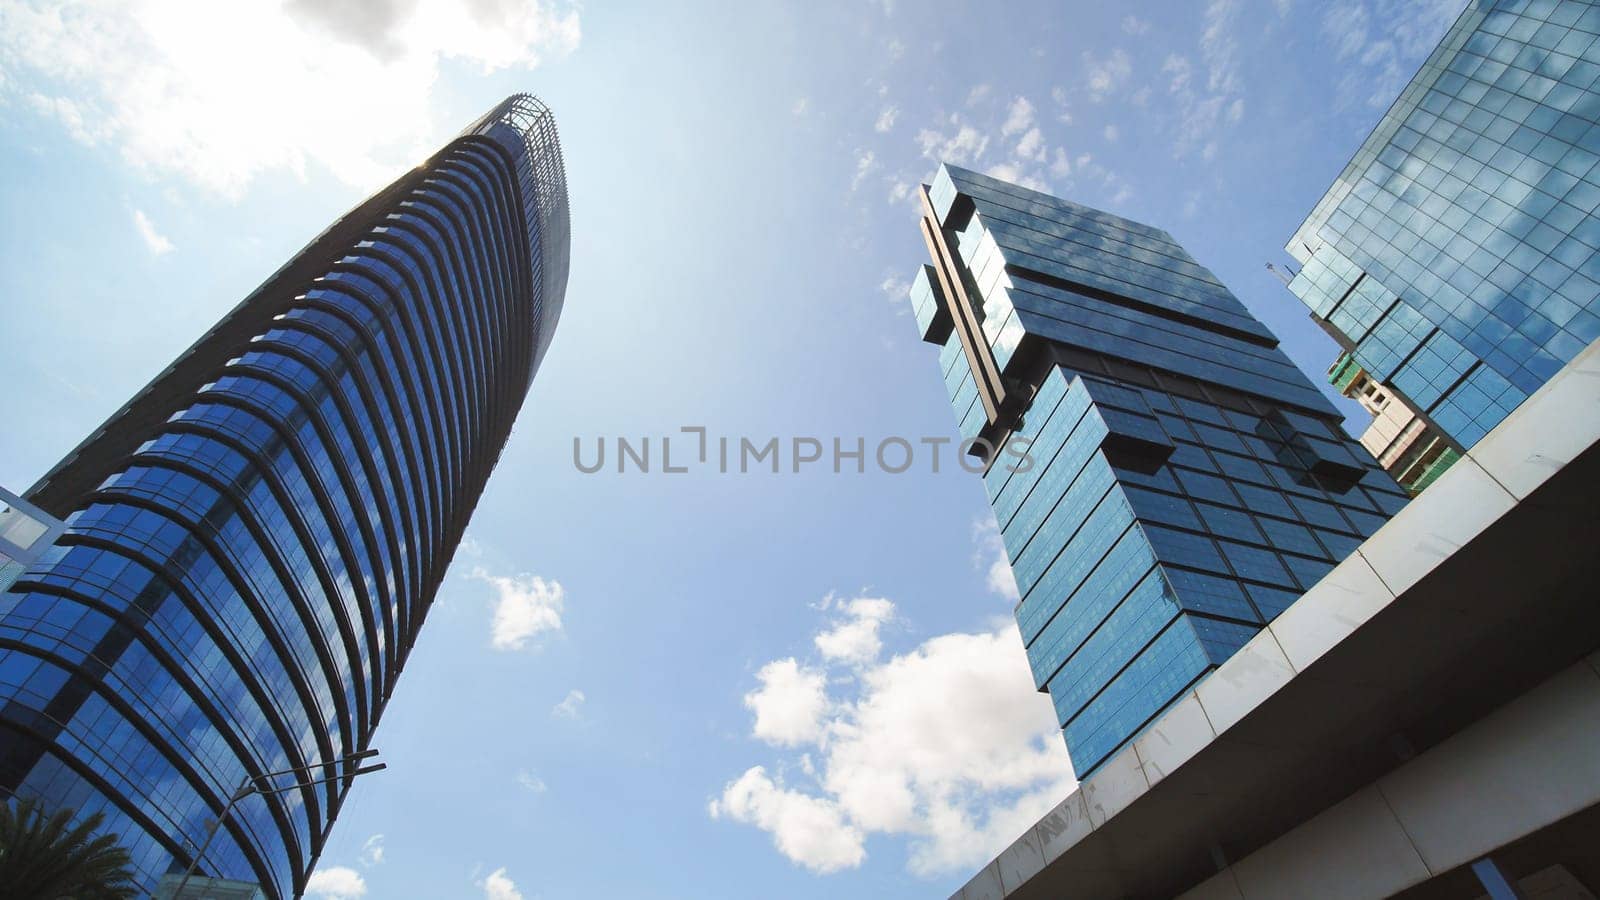 The streets of the skyscrapers of Jakarta, the capital of Indonesia. by DovidPro